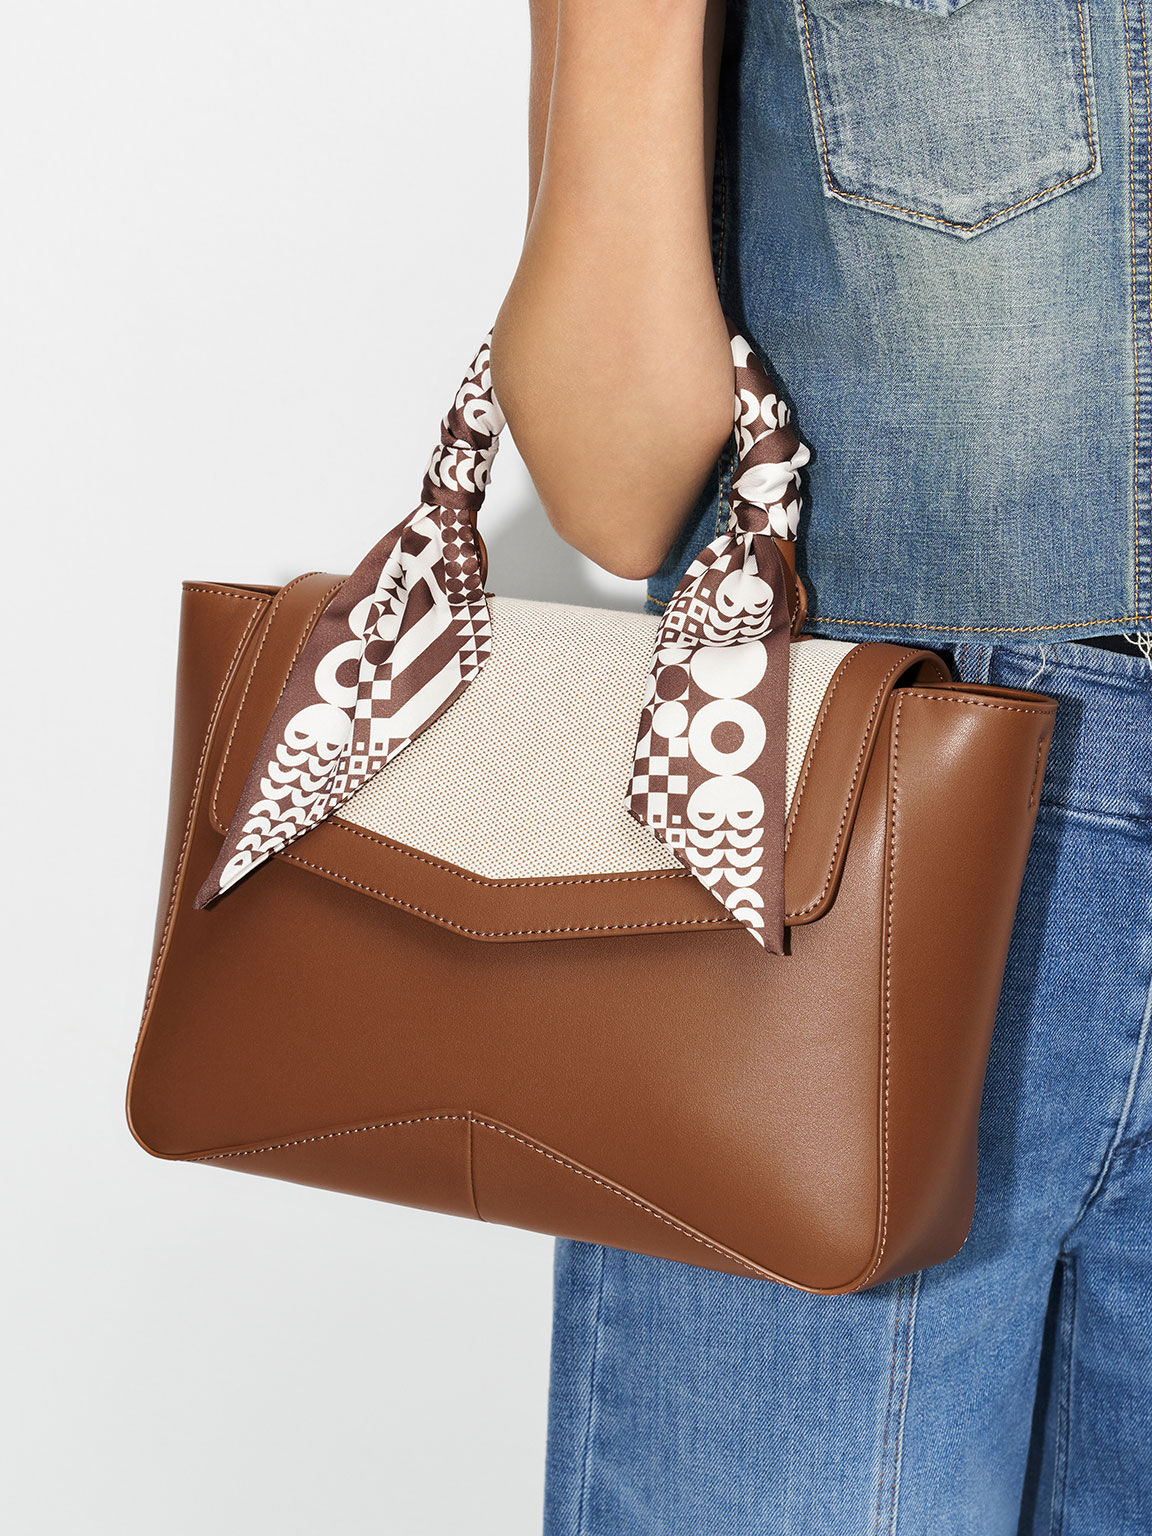 Arley Canvas Scarf-Wrapped Top Handle Bag, Chocolate, hi-res